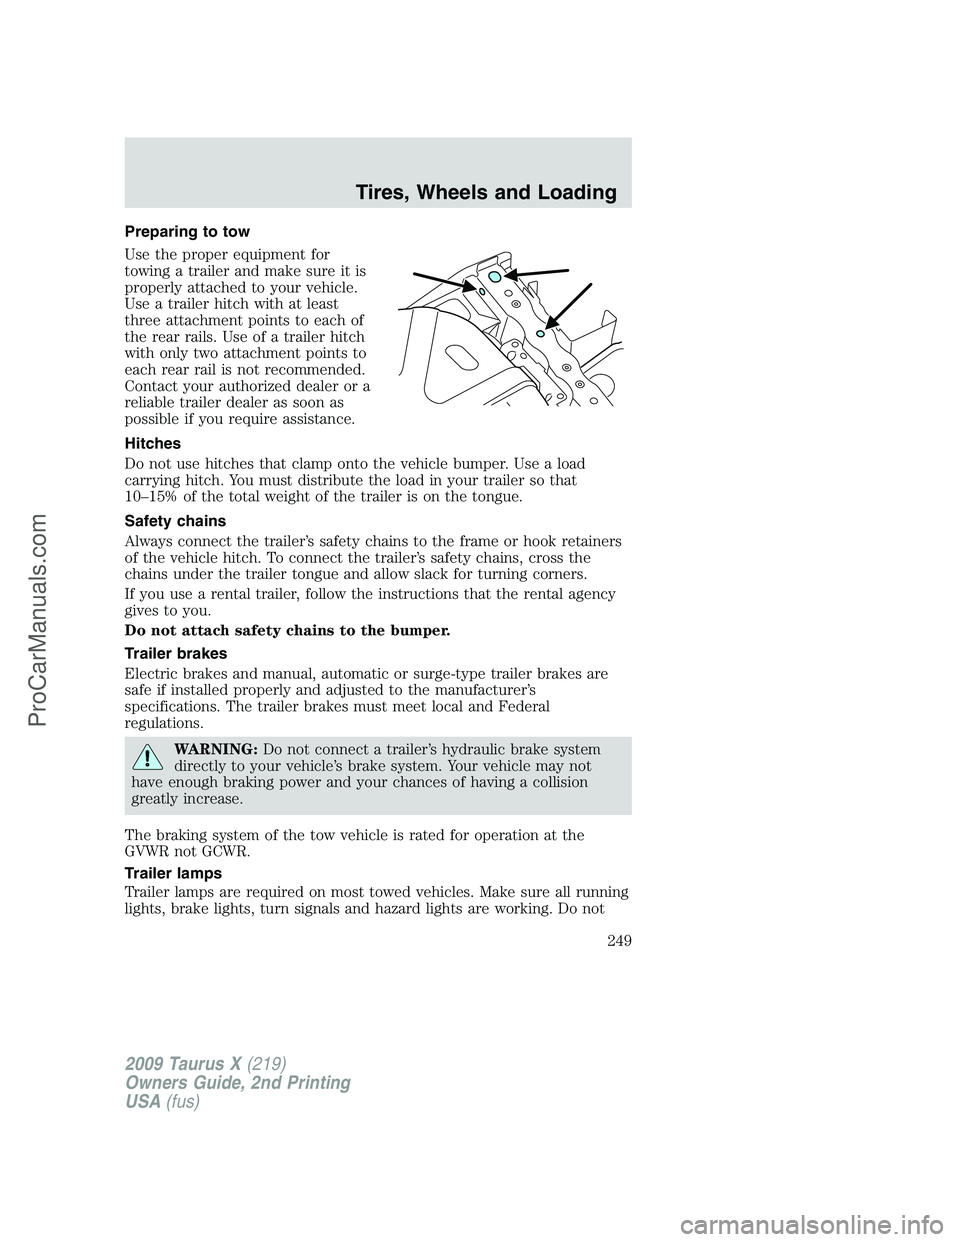 FORD FREESTYLE 2009  Owners Manual Preparing to tow
Use the proper equipment for
towing a trailer and make sure it is
properly attached to your vehicle.
Use a trailer hitch with at least
three attachment points to each of
the rear rail